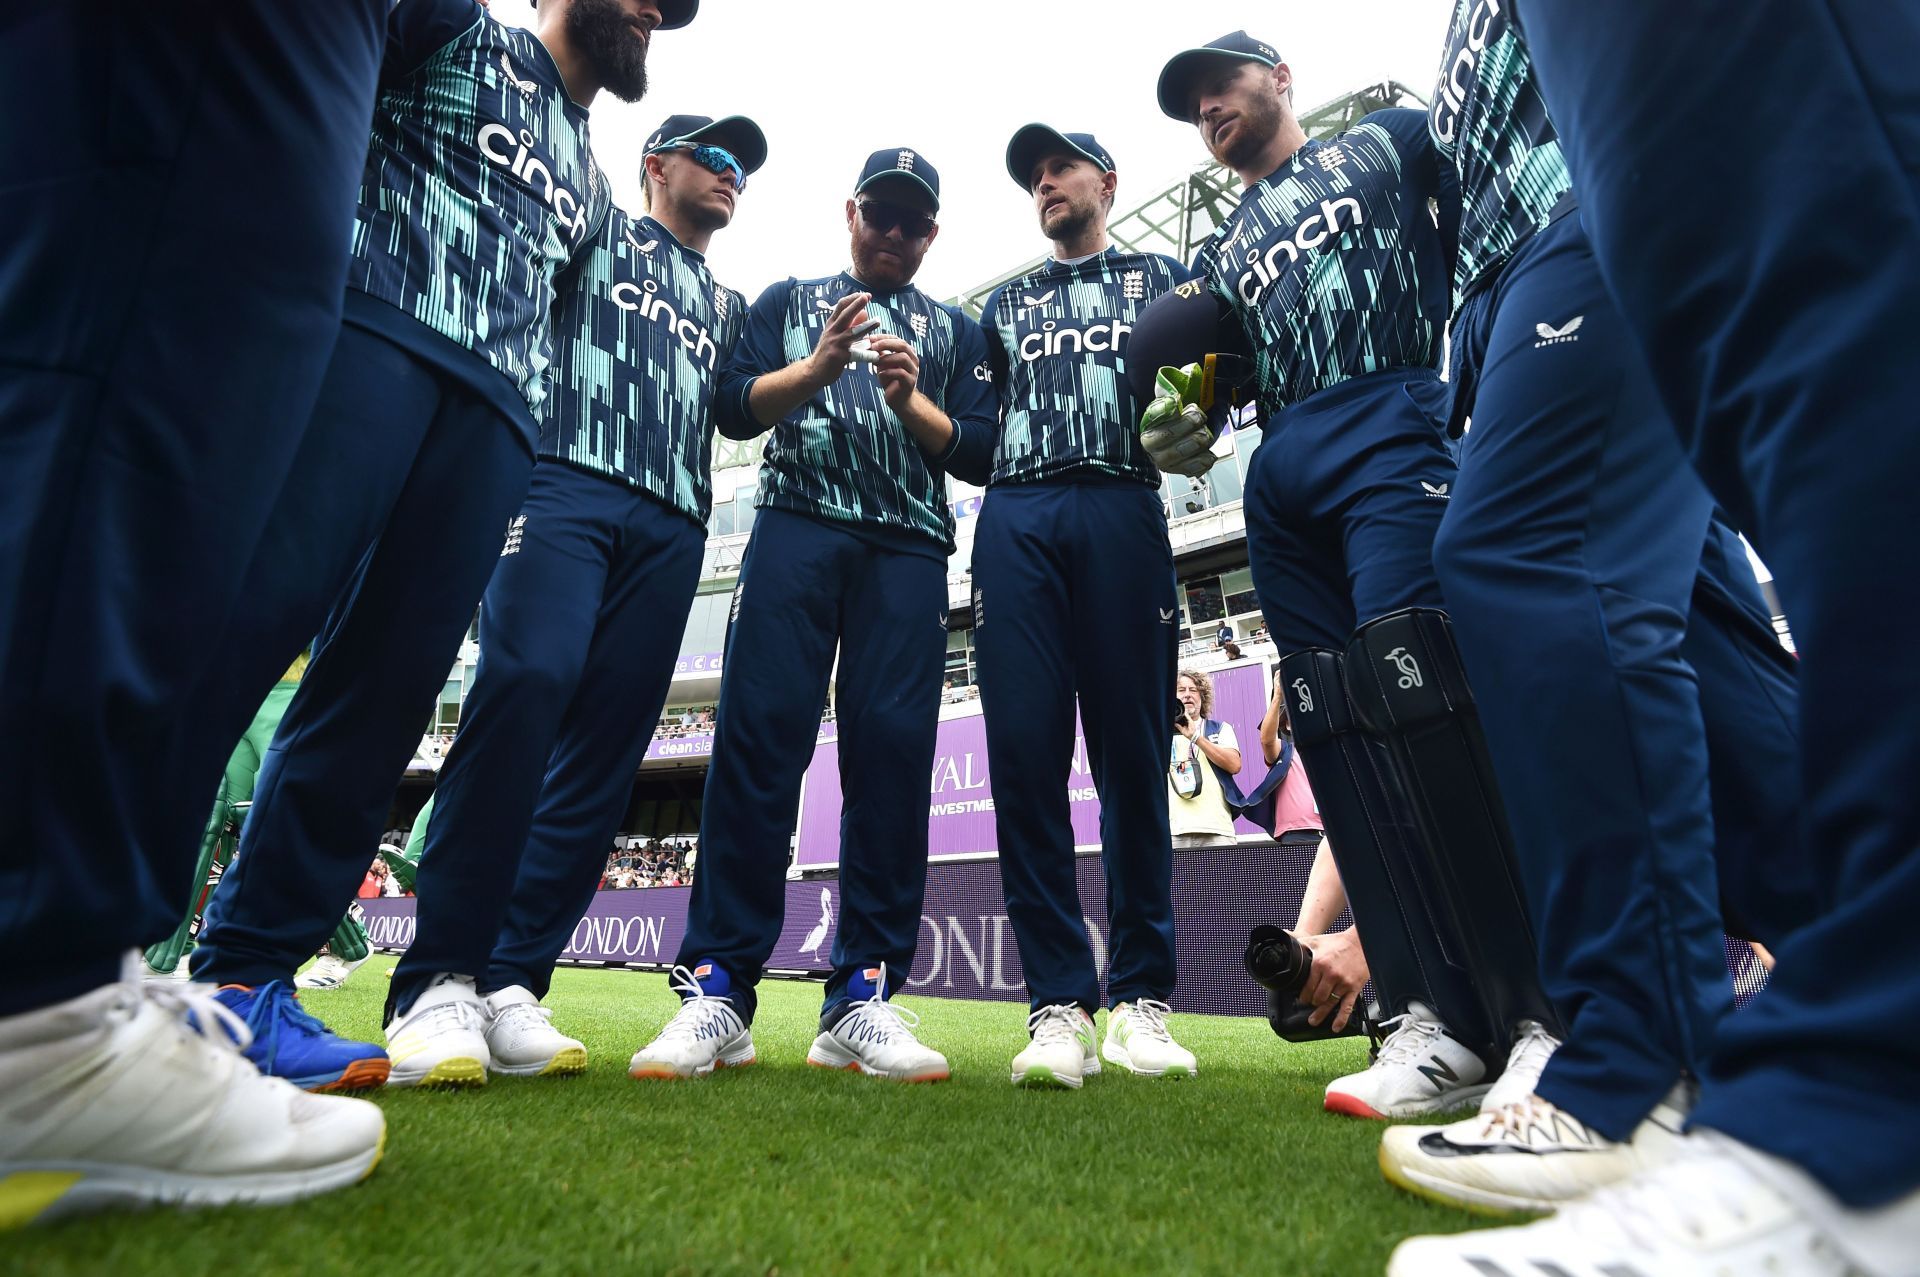 England v South Africa - 3rd Royal London Series One Day International (Image courtesy: Getty)